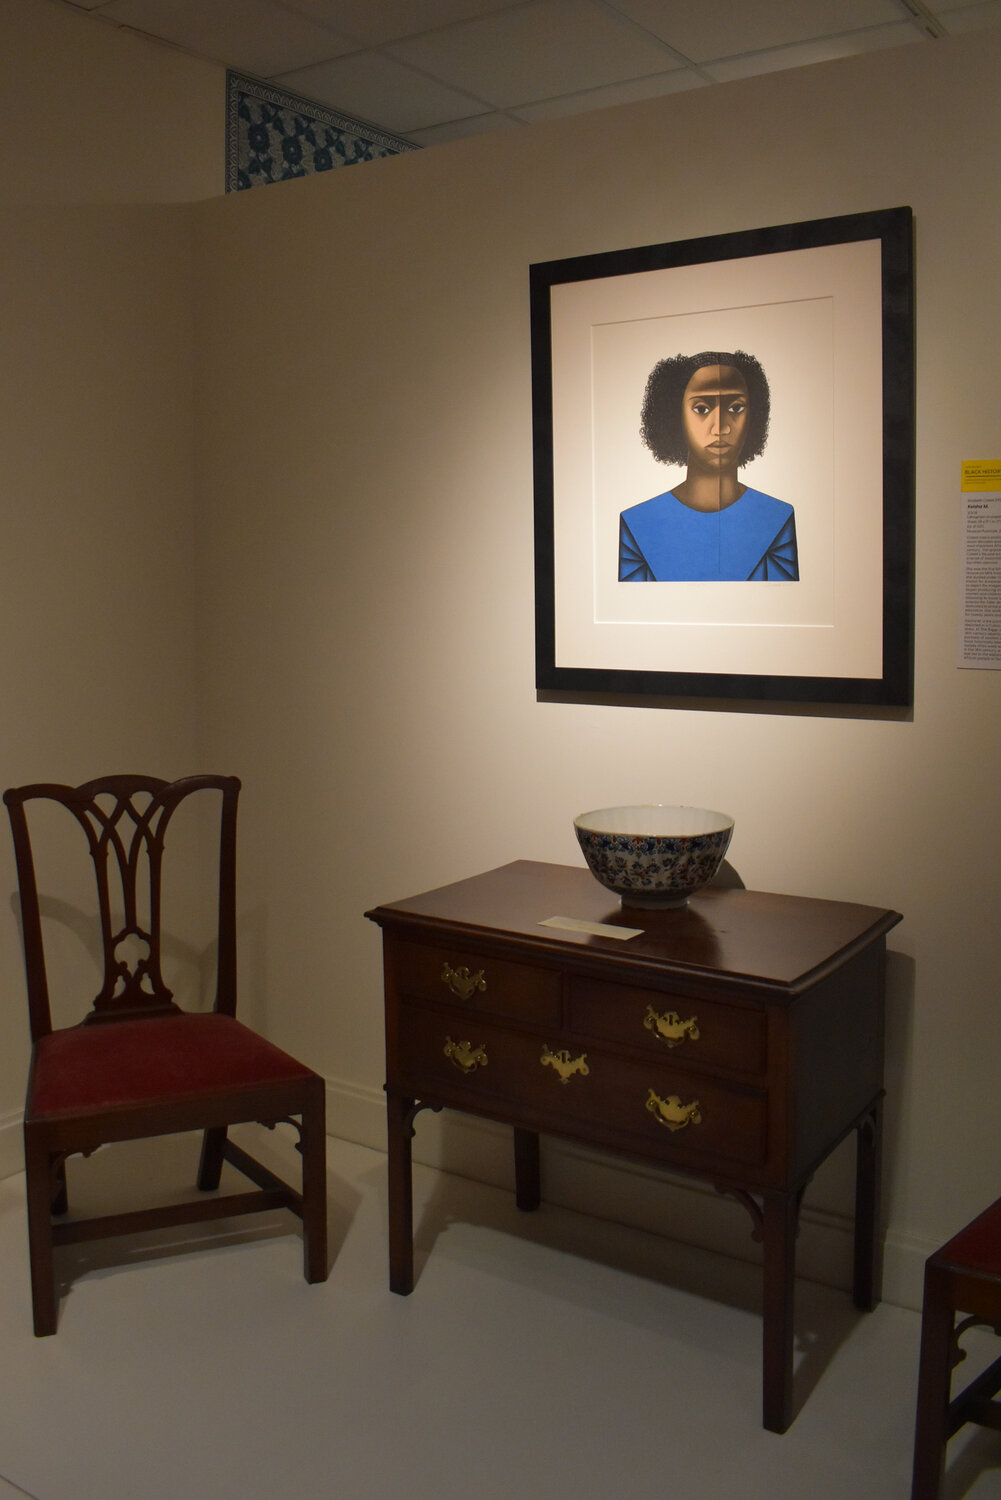 The 2008 lithograph “Keisha M.” by Elizabeth Catlett, with furniture at the Biggs Museum of American Art. An important African American artist, Catlett’s life (1915-2012) and art “were fueled by that legacy [of her ancestors’ enslavement]  and a sense of responsibility to those whose voices were too often silenced,” according to the Biggs. This image was intentionally hung in an 18th-century gallery near other portraits of women in blue—the demand for indigo dye spurred expansion of the slave trade.